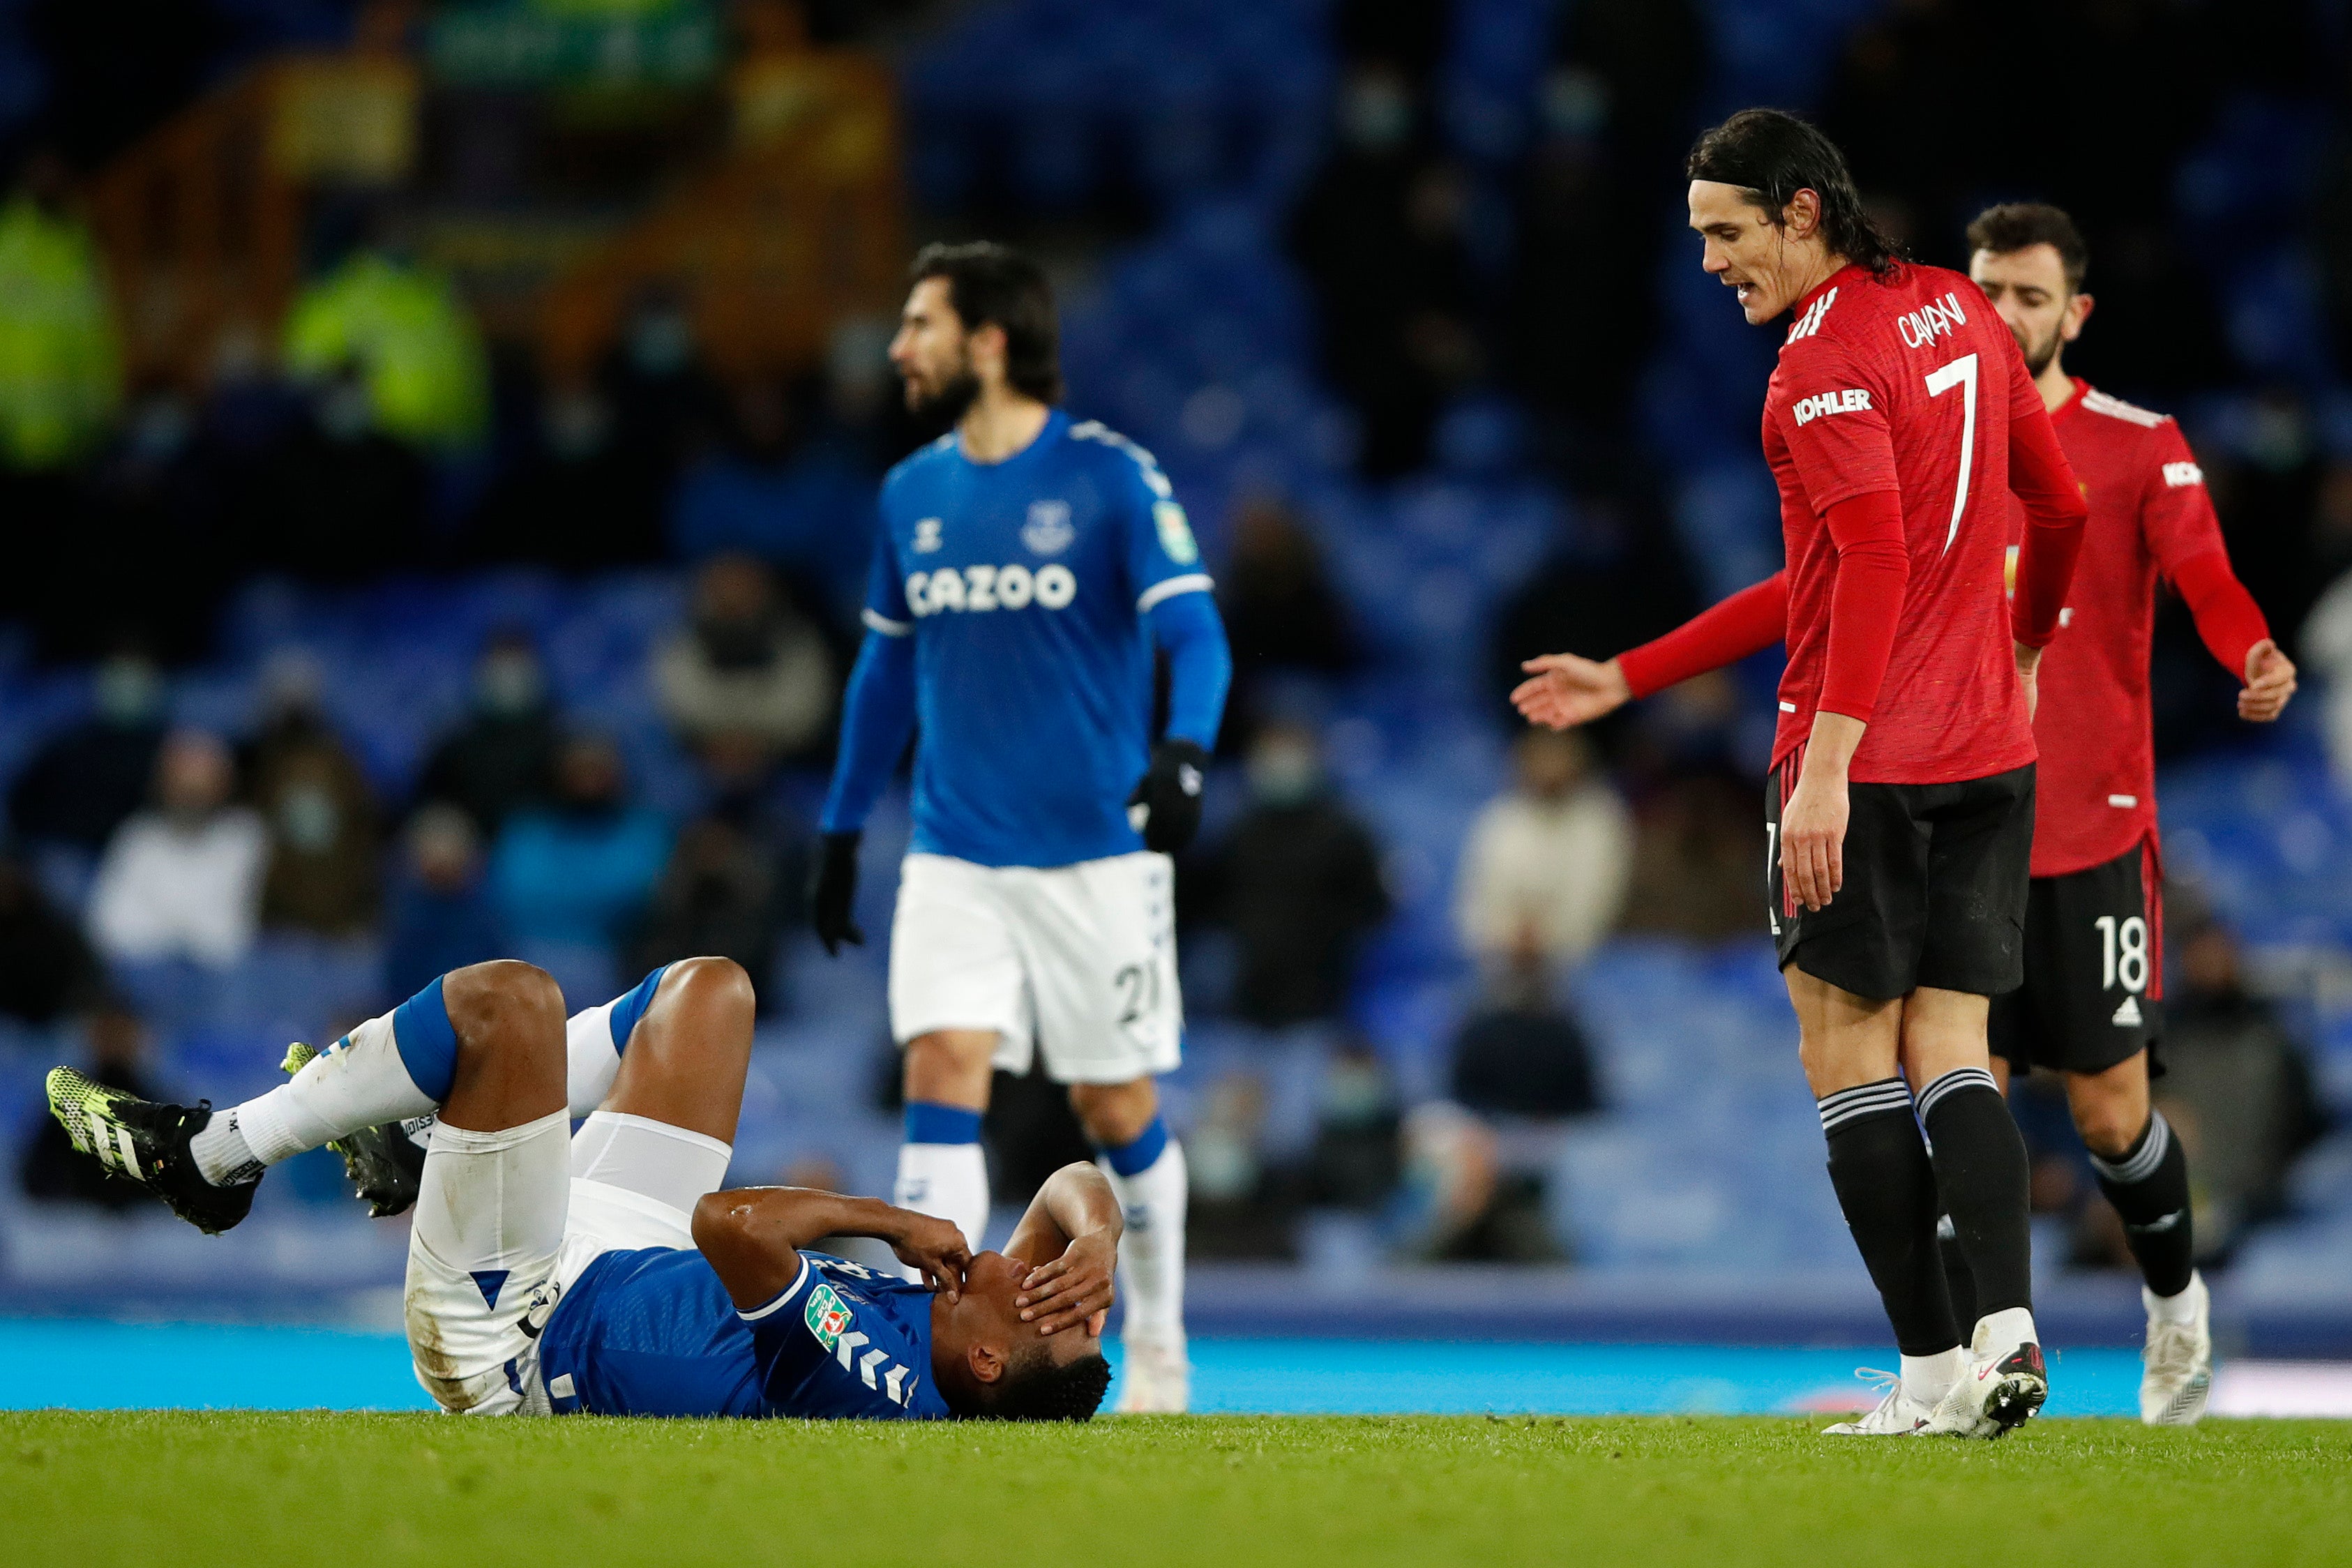 Edinson Cavani escaped any action for grabbing Yerry Mina by the throat during Manchester United’s win over Everton